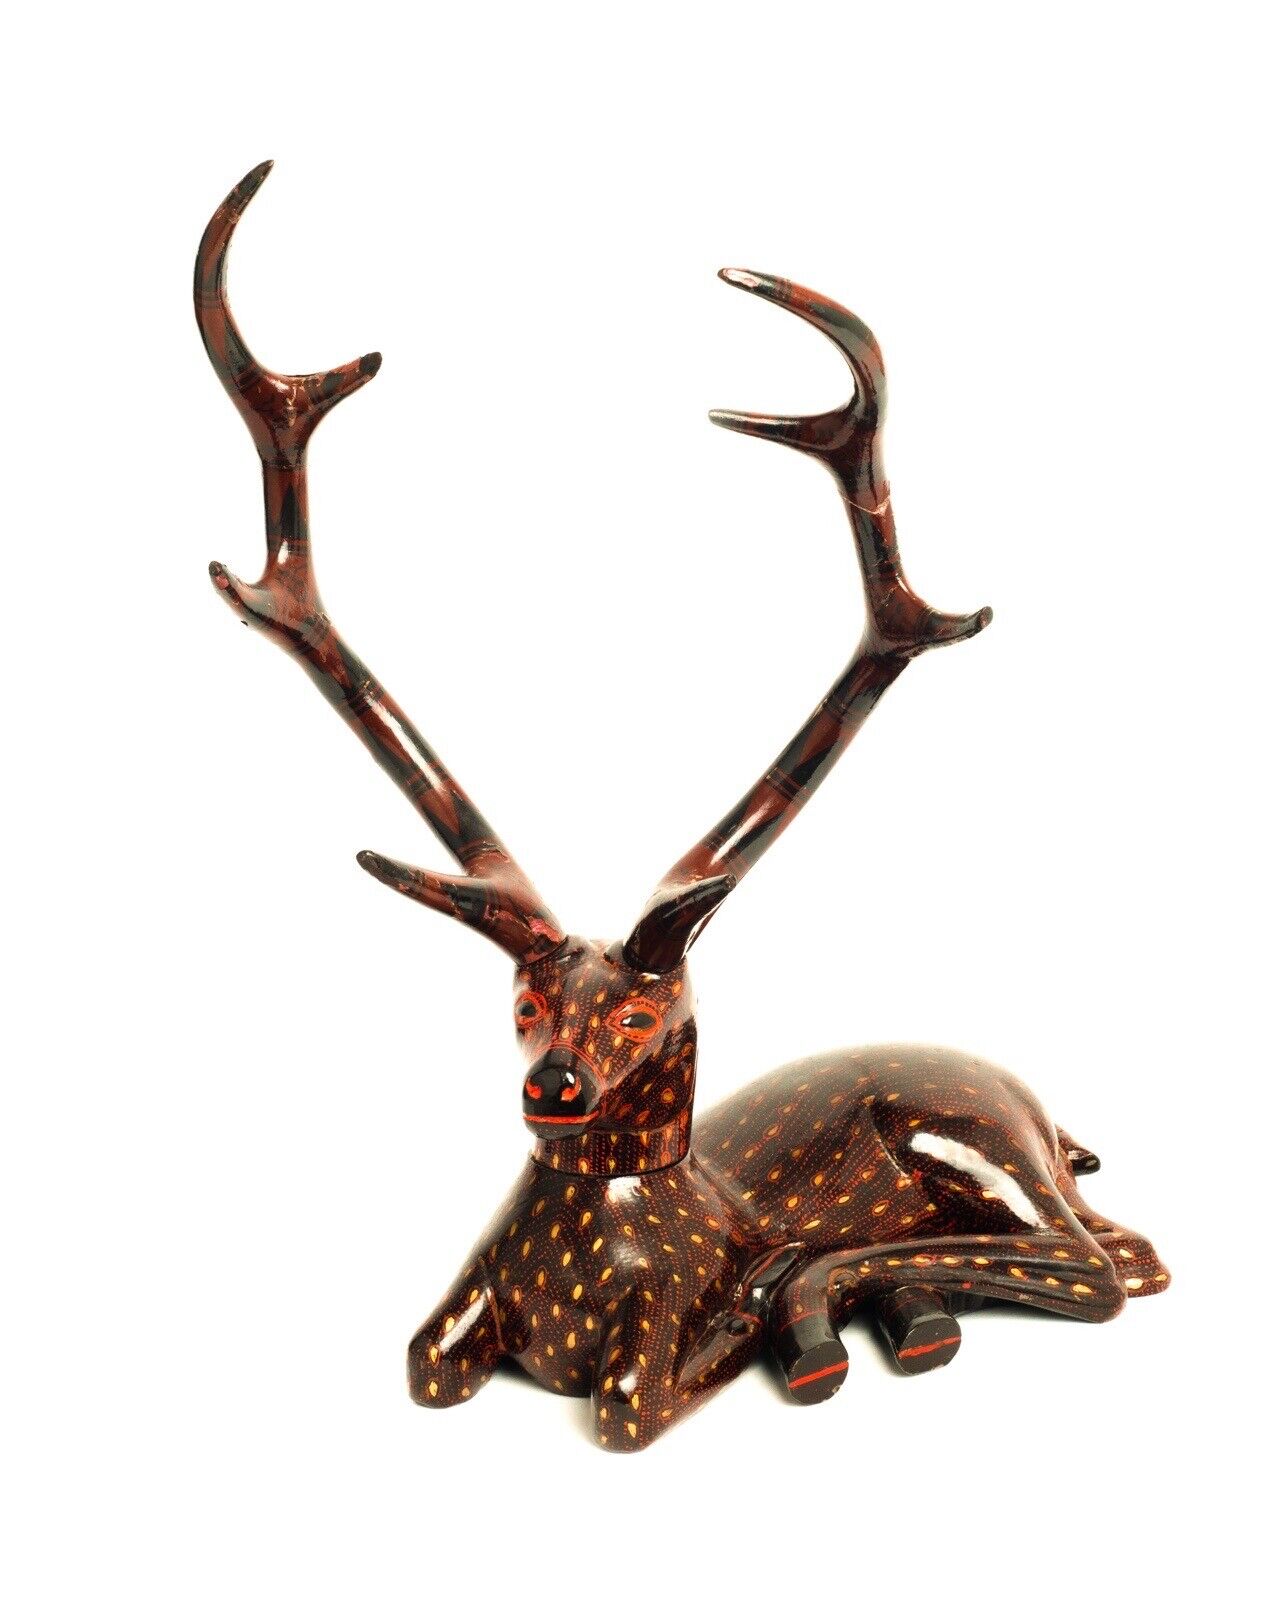 Antique Chinese Lacquered Wooden Sika Deer Stag Sculpture, Lacquerware — READ